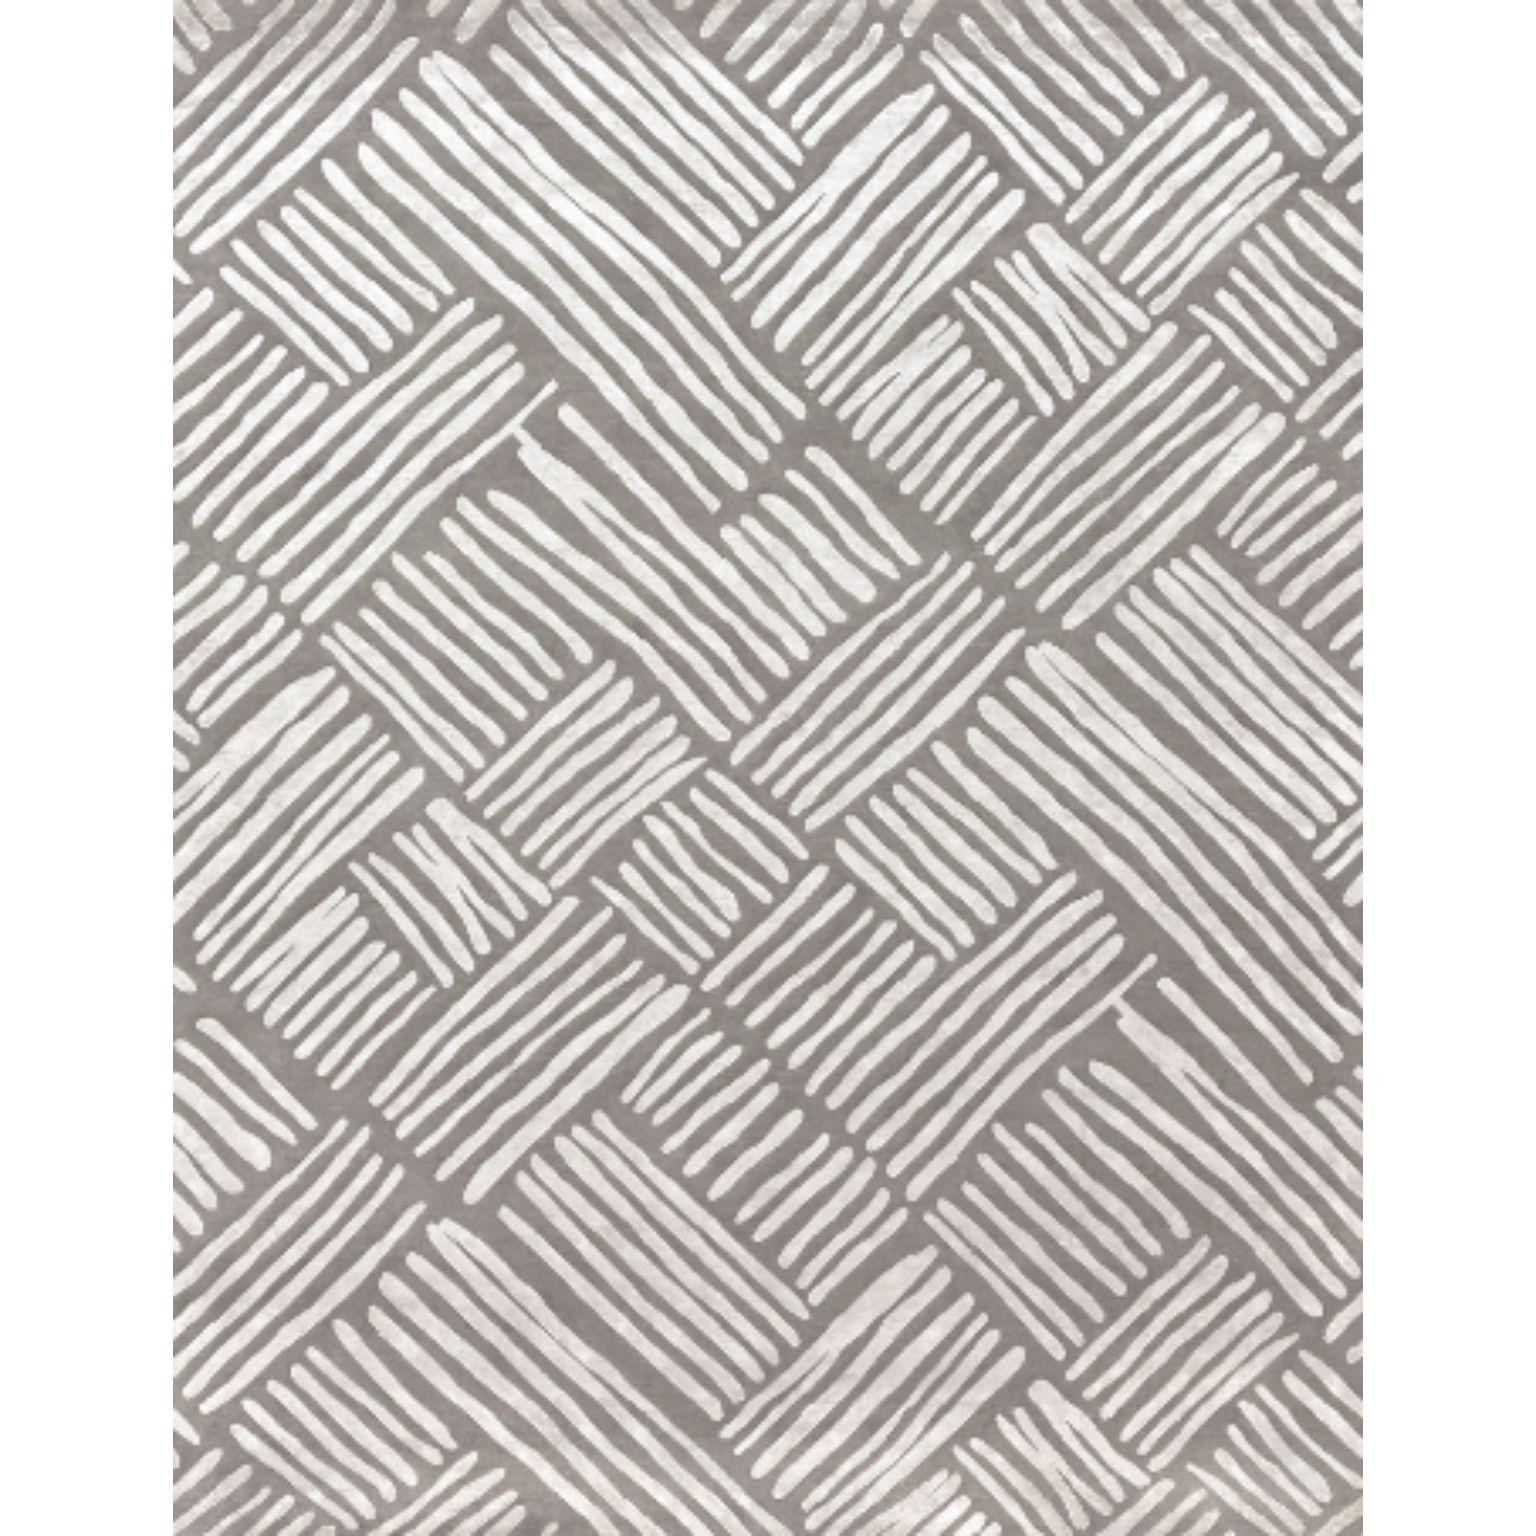 FLAIR 200 rug by Illulian
Dimensions: D300 x H200 cm 
Materials: Wool 50%, Silk 50%
Variations available and prices may vary according to materials and sizes.

Illulian, historic and prestigious rug company brand, internationally renowned in